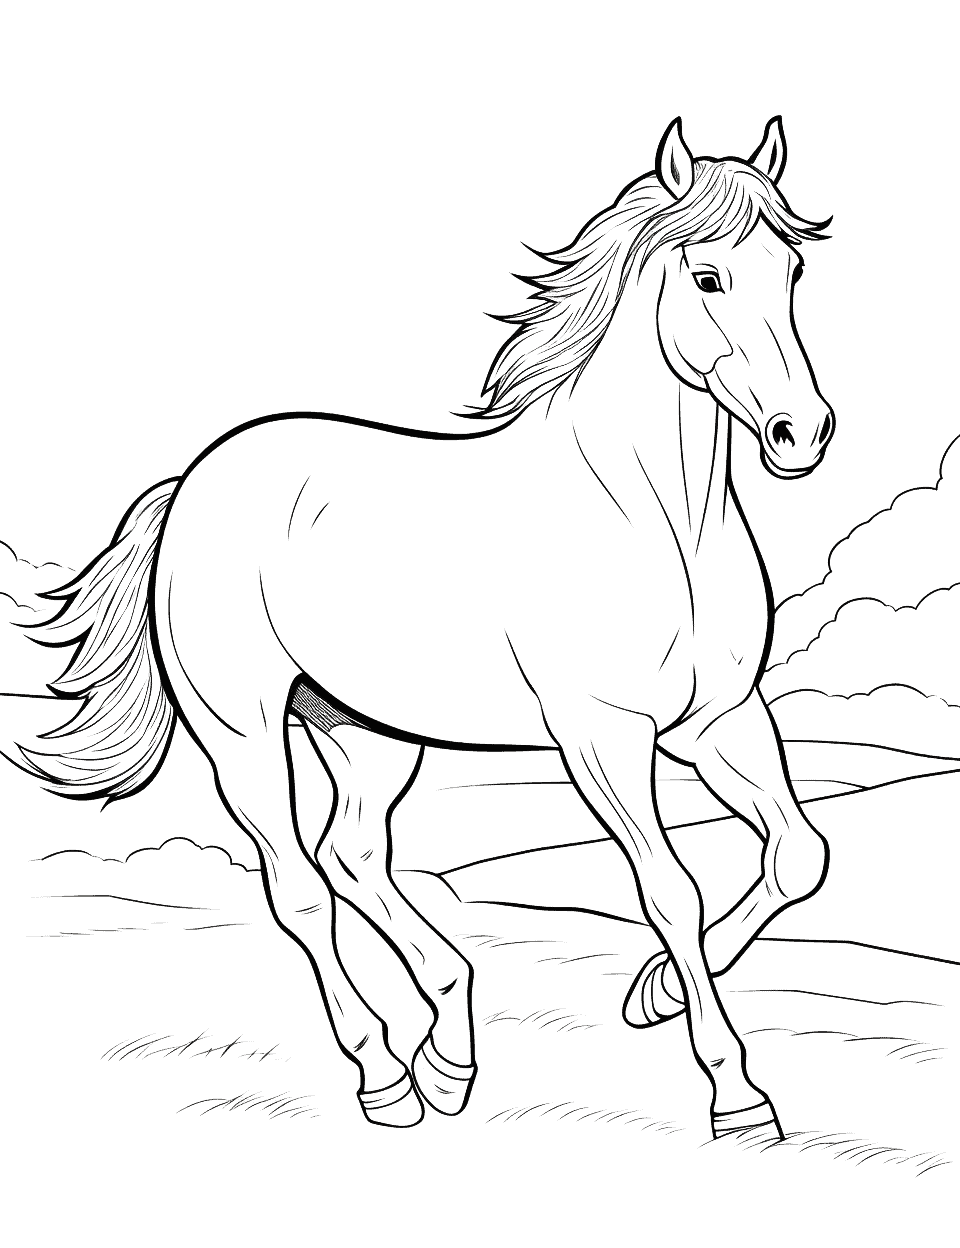 Mustang Running Free Horse Coloring Page - A wild Mustang horse running free across the open plains.